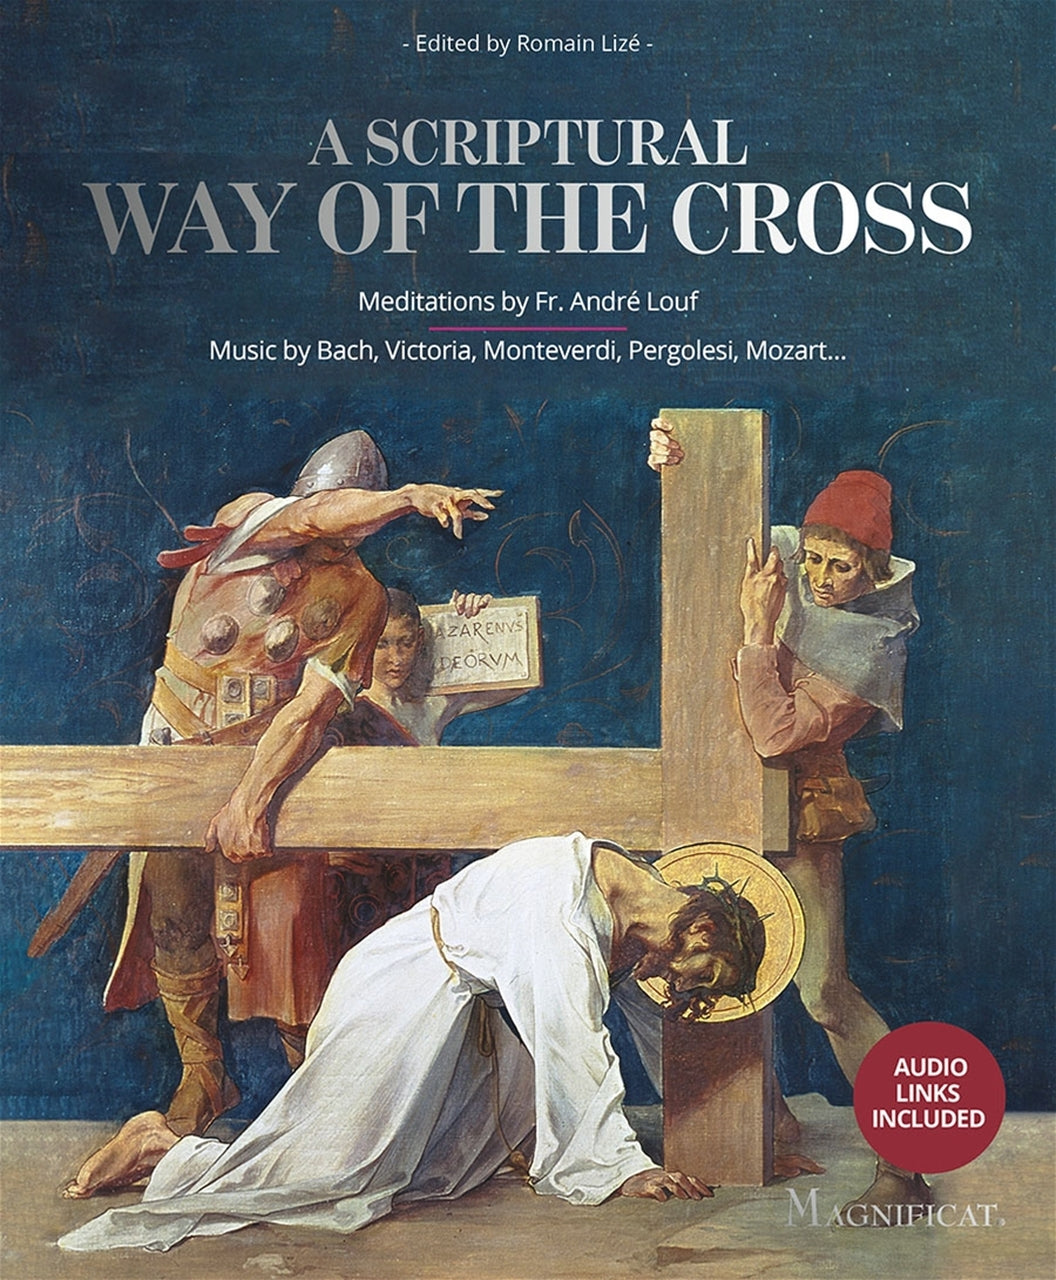 Book: a Scriptural Way of the Cross